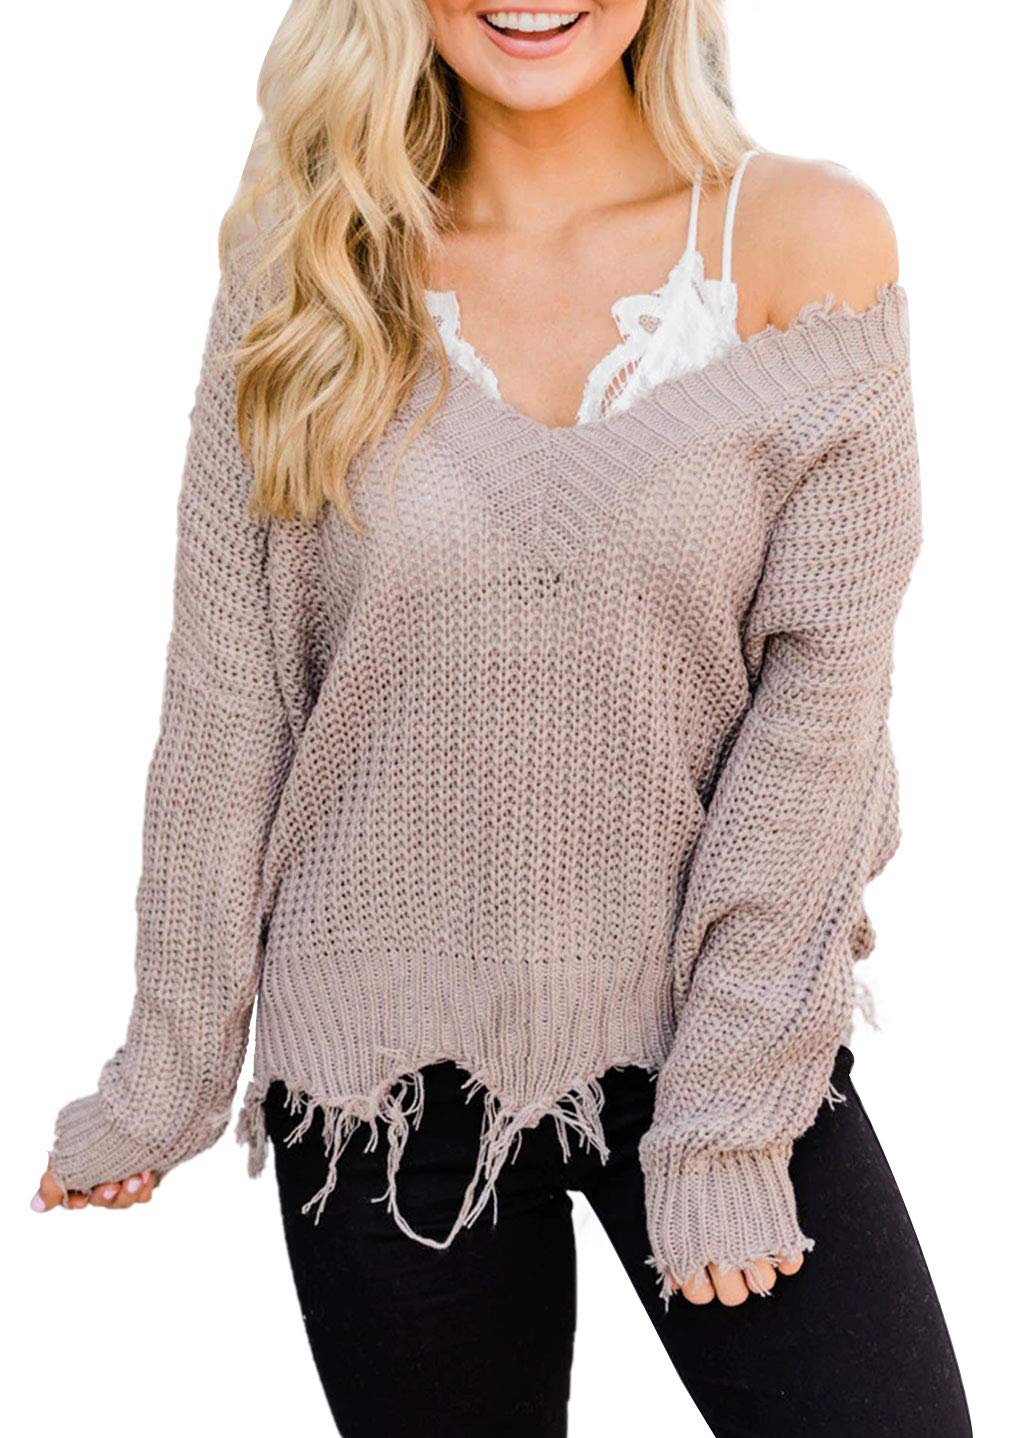 Book Cover LEANI Women's Loose Knitted Sweater Long Sleeve V-Neck Ripped Pullover Sweaters Crop Top Knit Jumper A-khaki Small